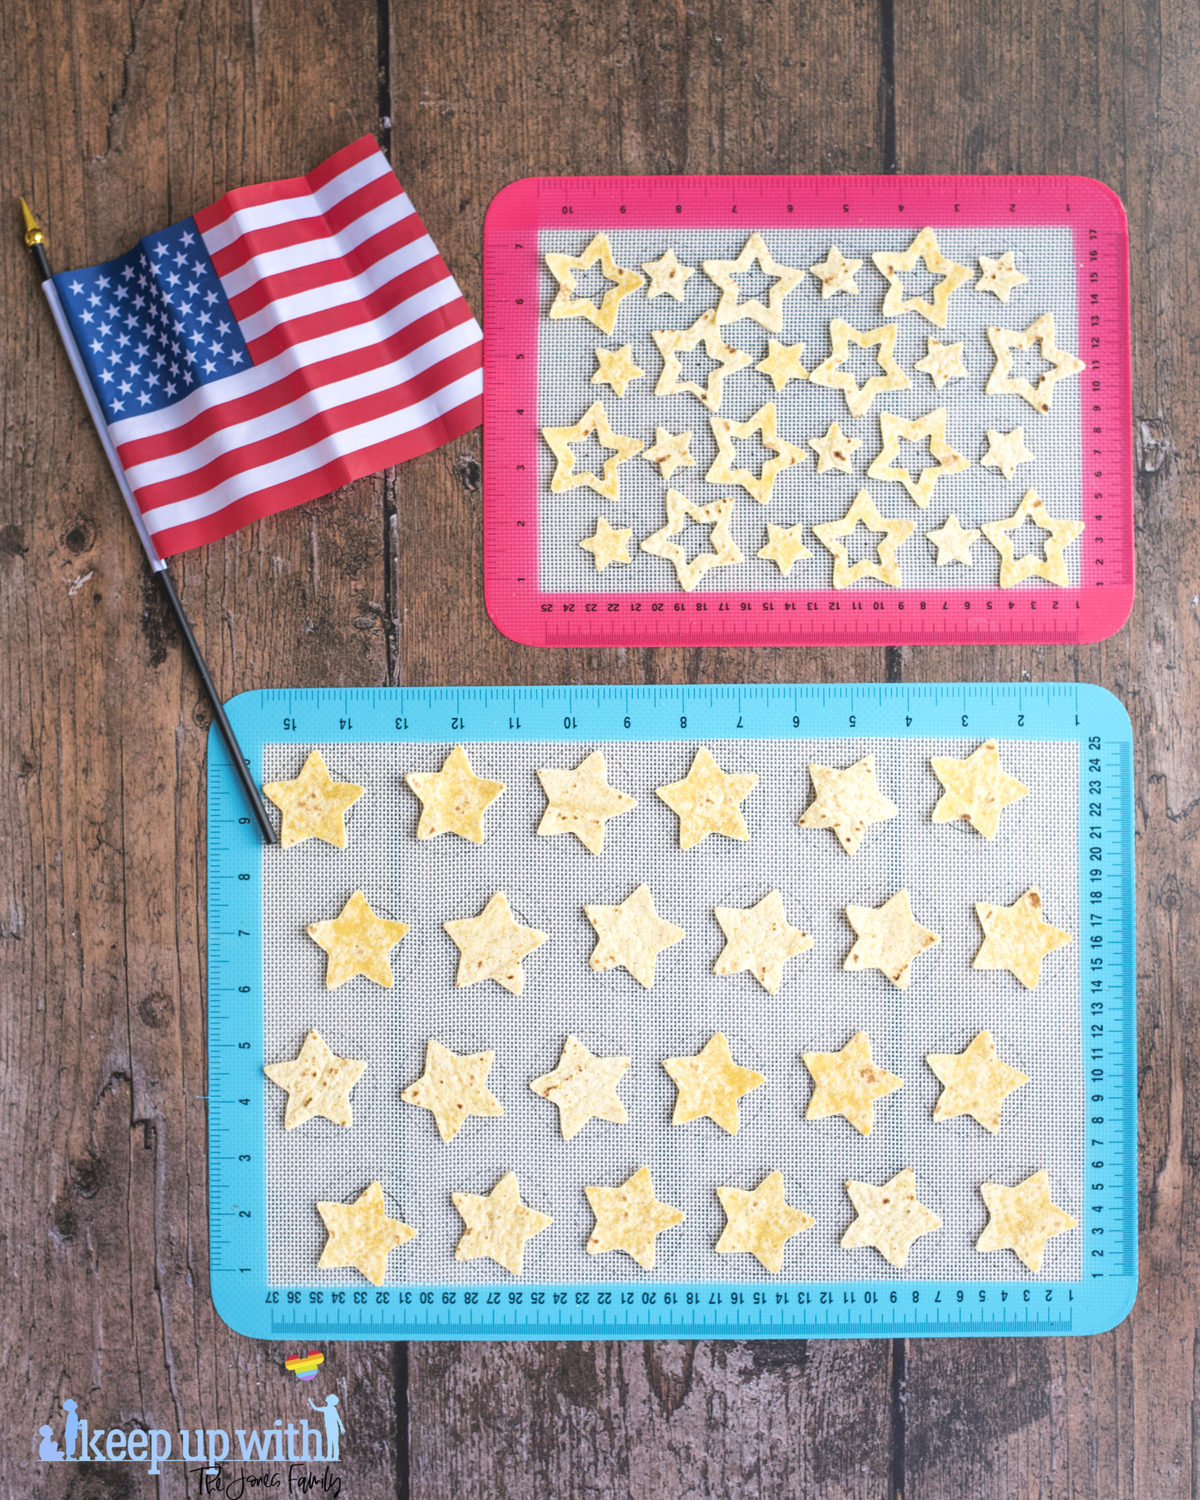 Image shows two silicone baking sheets on a dark wooden table. One is red and one is blue. On top of them are cut out star chips 'n' dip nachos from tortillas. The American flag is laid next to the baking sheets. Image by keep up with the jones family.